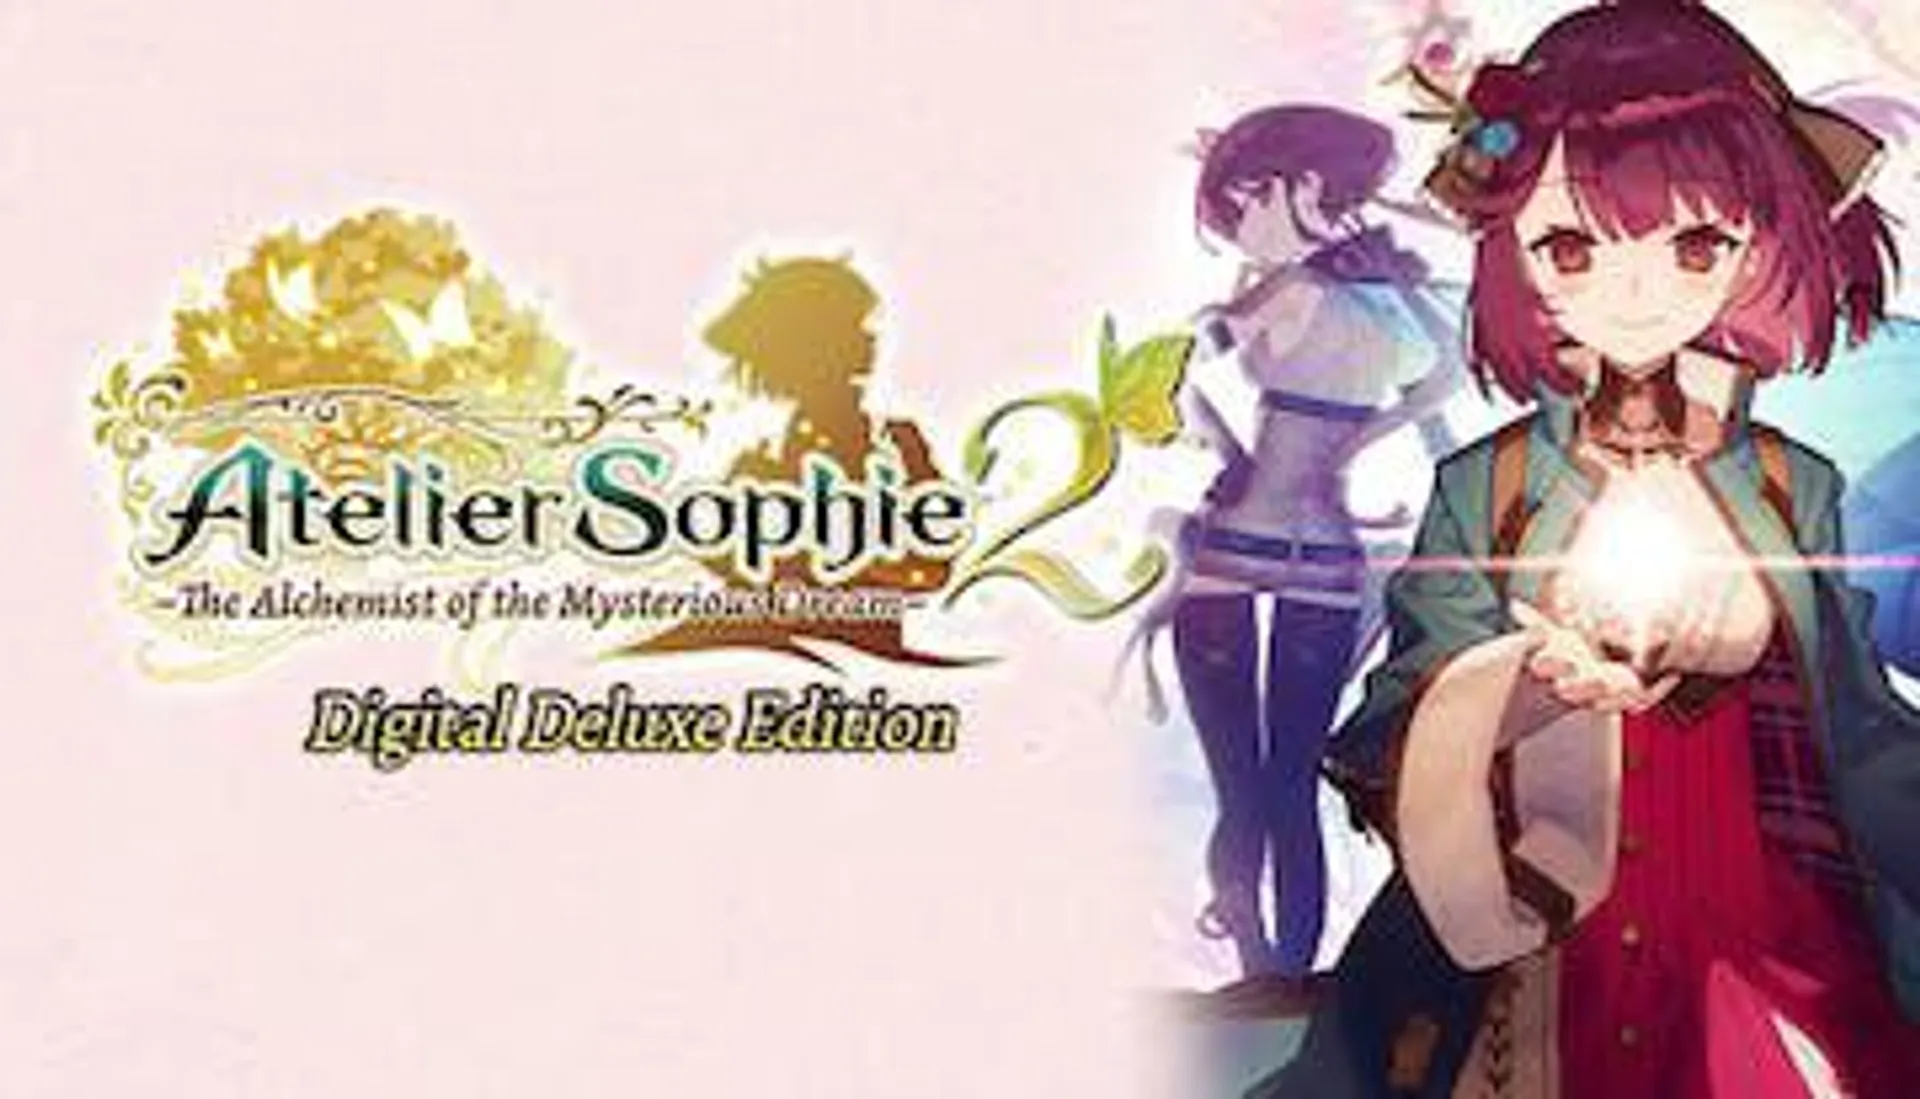 Atelier Sophie 2: The Alchemist of the Mysterious Dream Digital Deluxe Edition